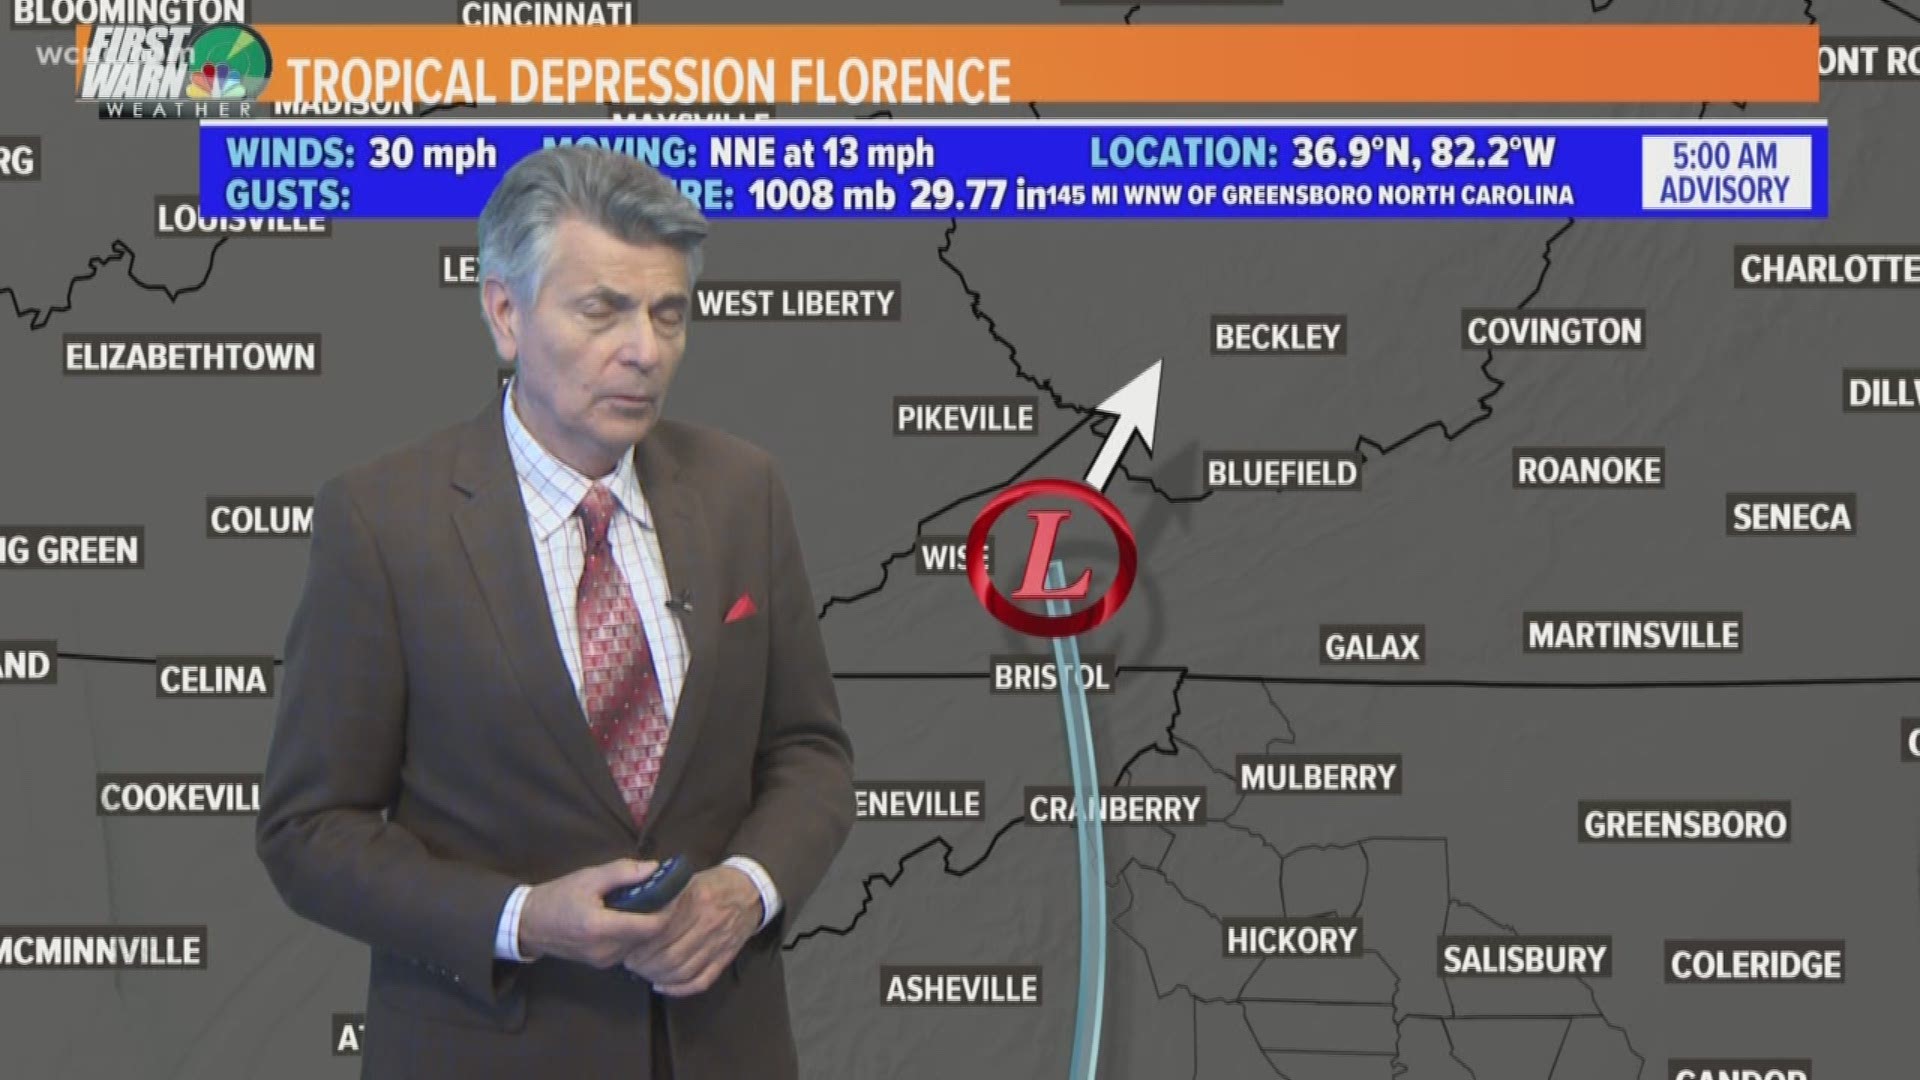 NBC Charlotte's First Warn weather team has the latest weather update as Tropical Depression Florence begins to move out of the area.